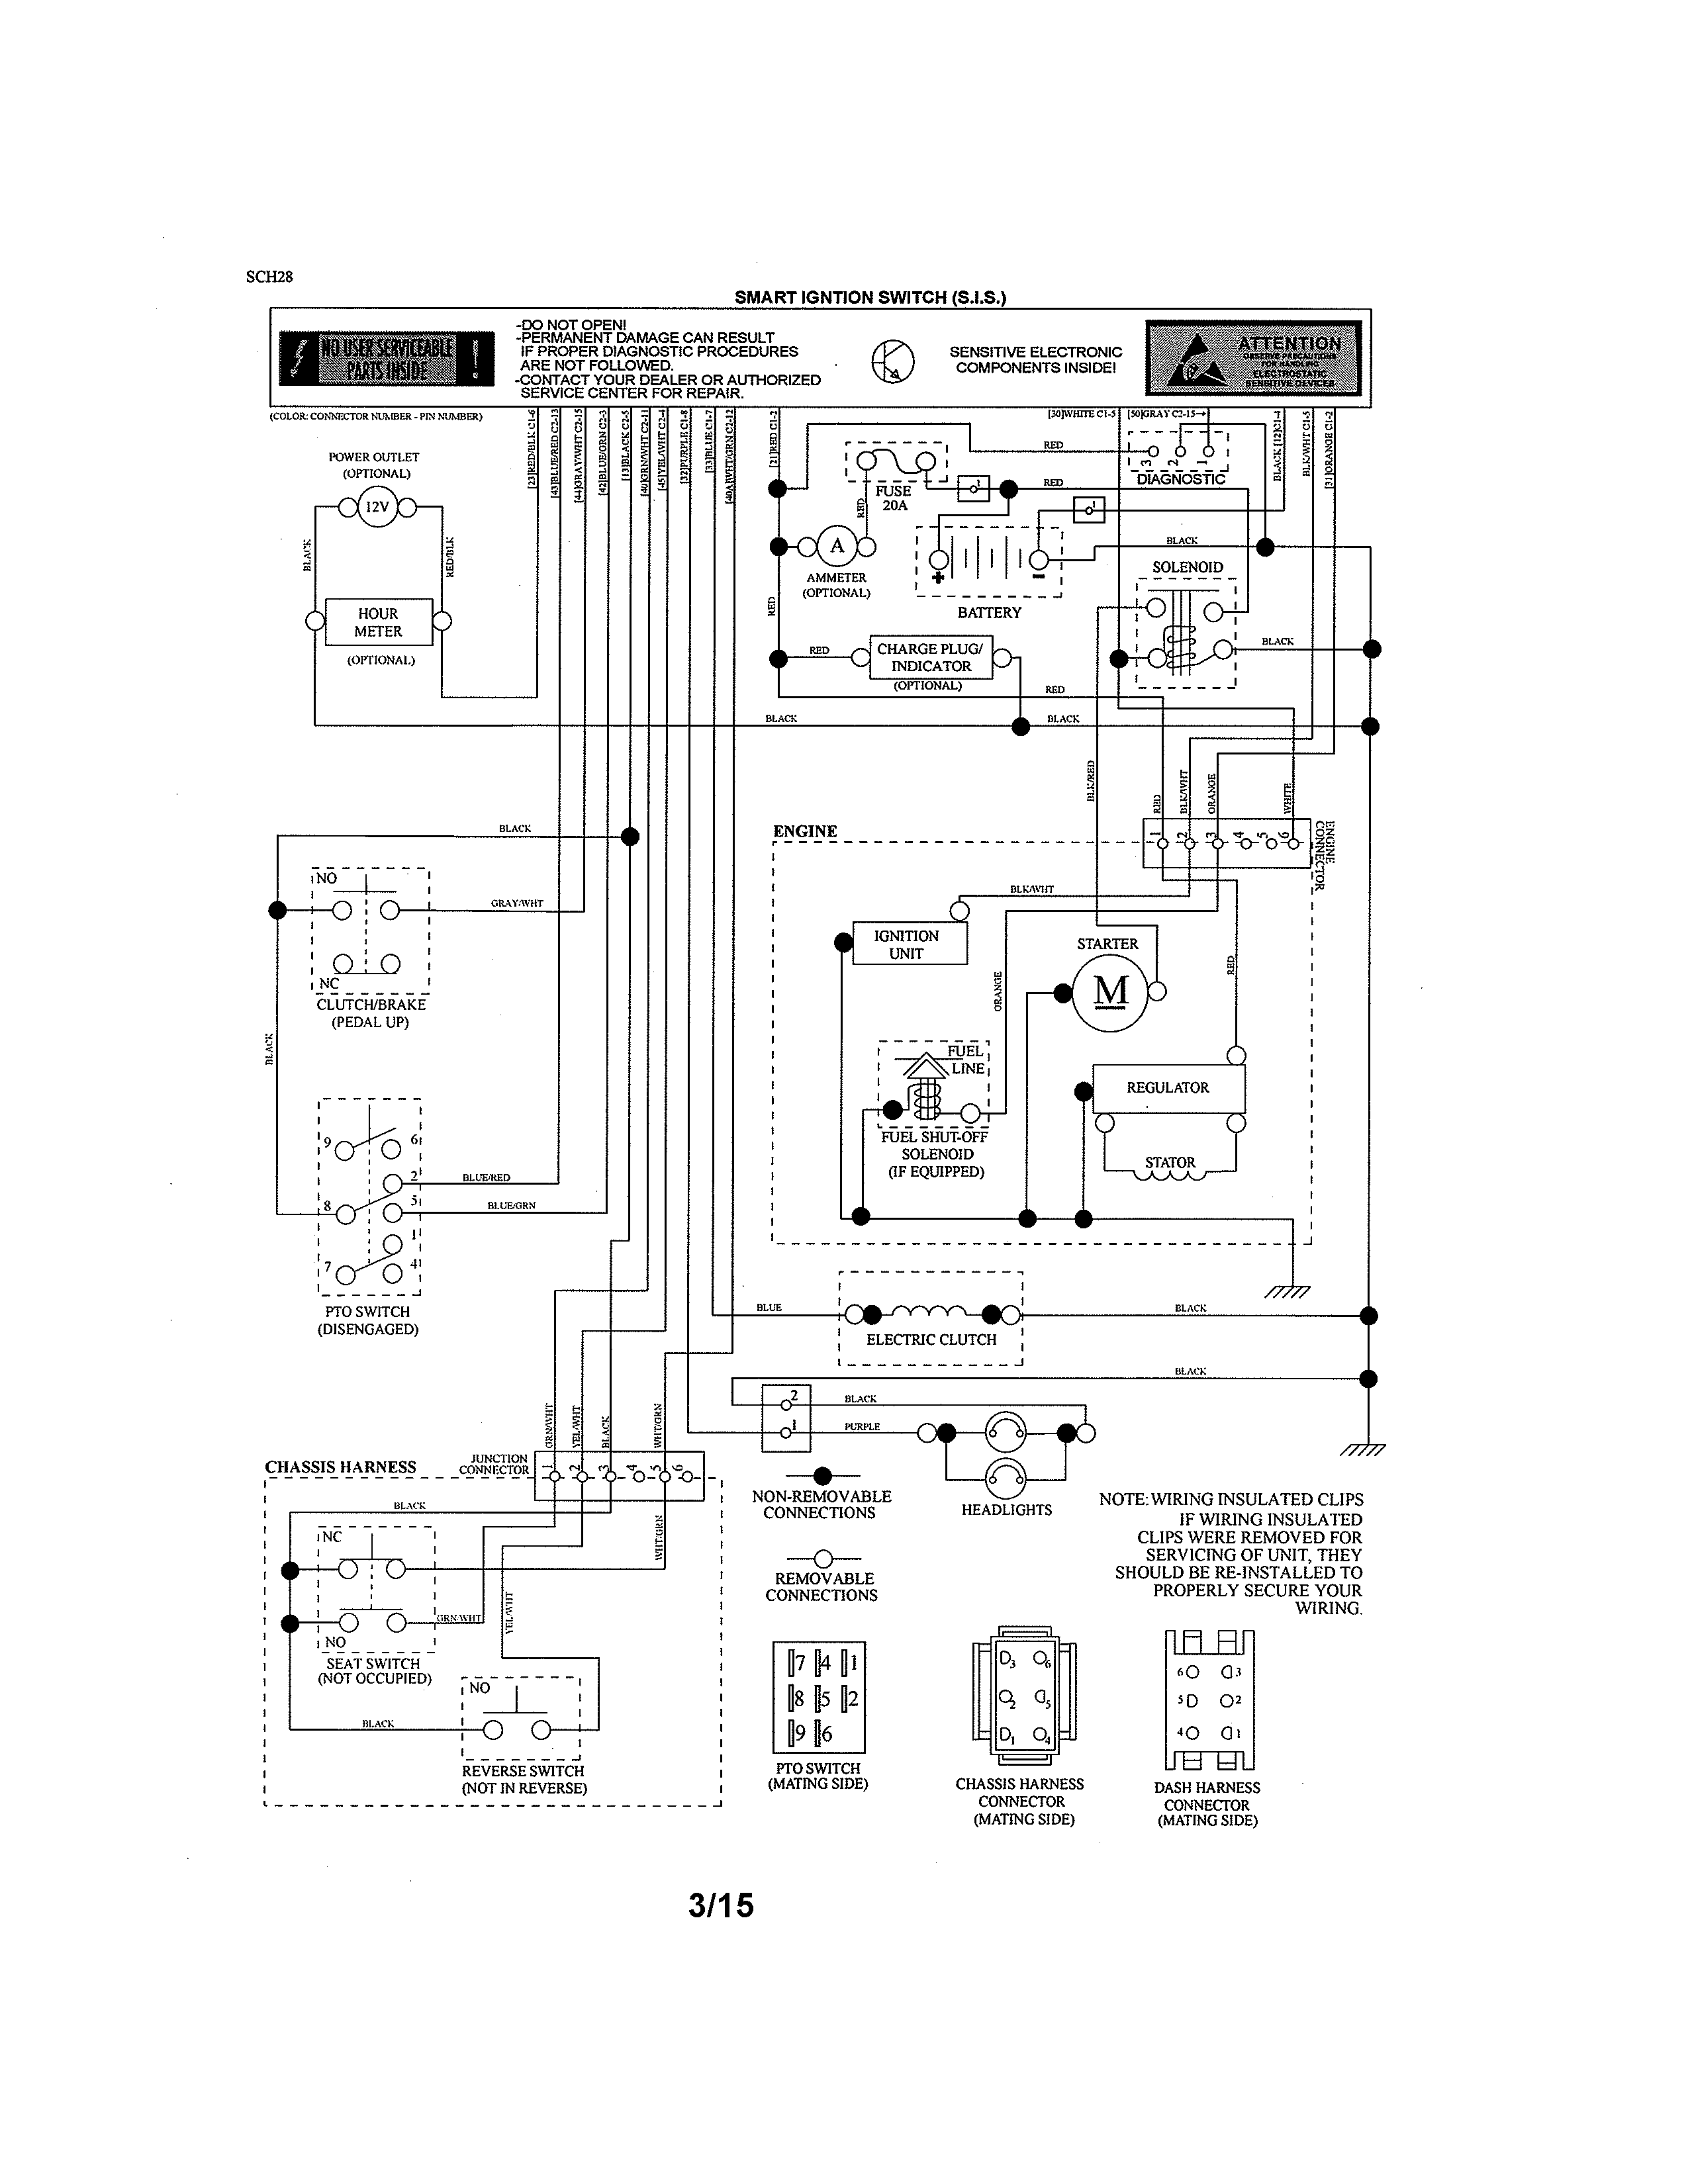 Craftsman Gt5000 Wiring Diagram from c.searspartsdirect.com